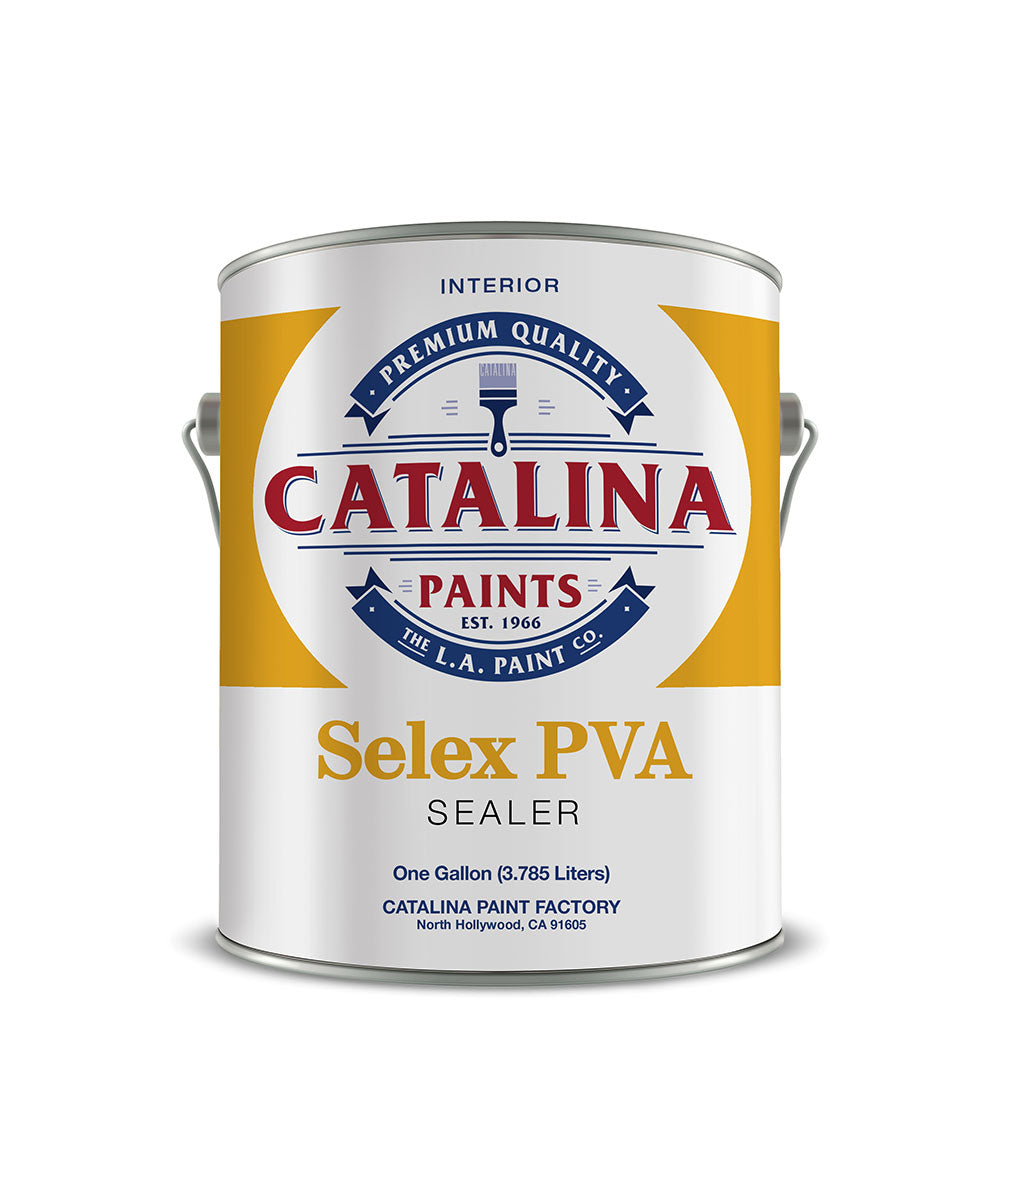 Selex PVA Primer 6500, available at Catalina Paints in CA.